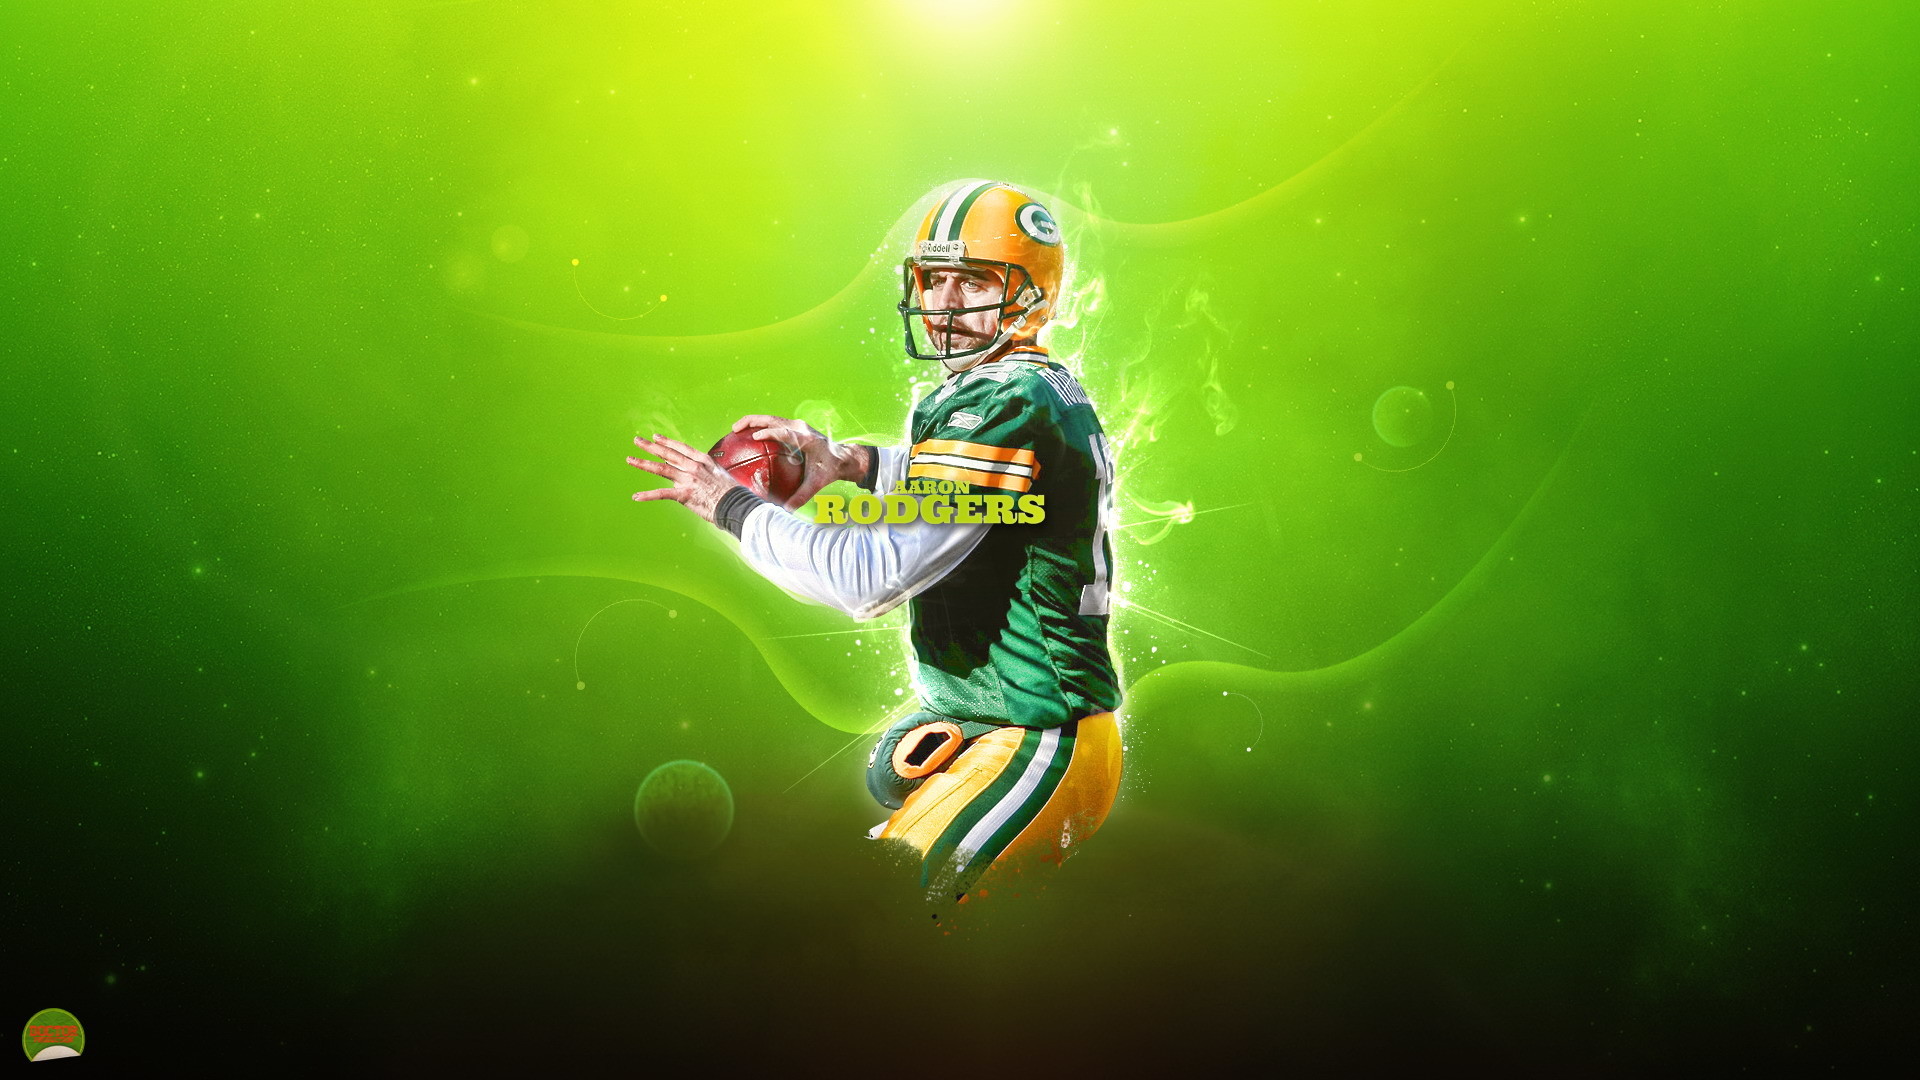 For Green Bay Packers Aaron Rodgers Wallpaper Green Bay Packers